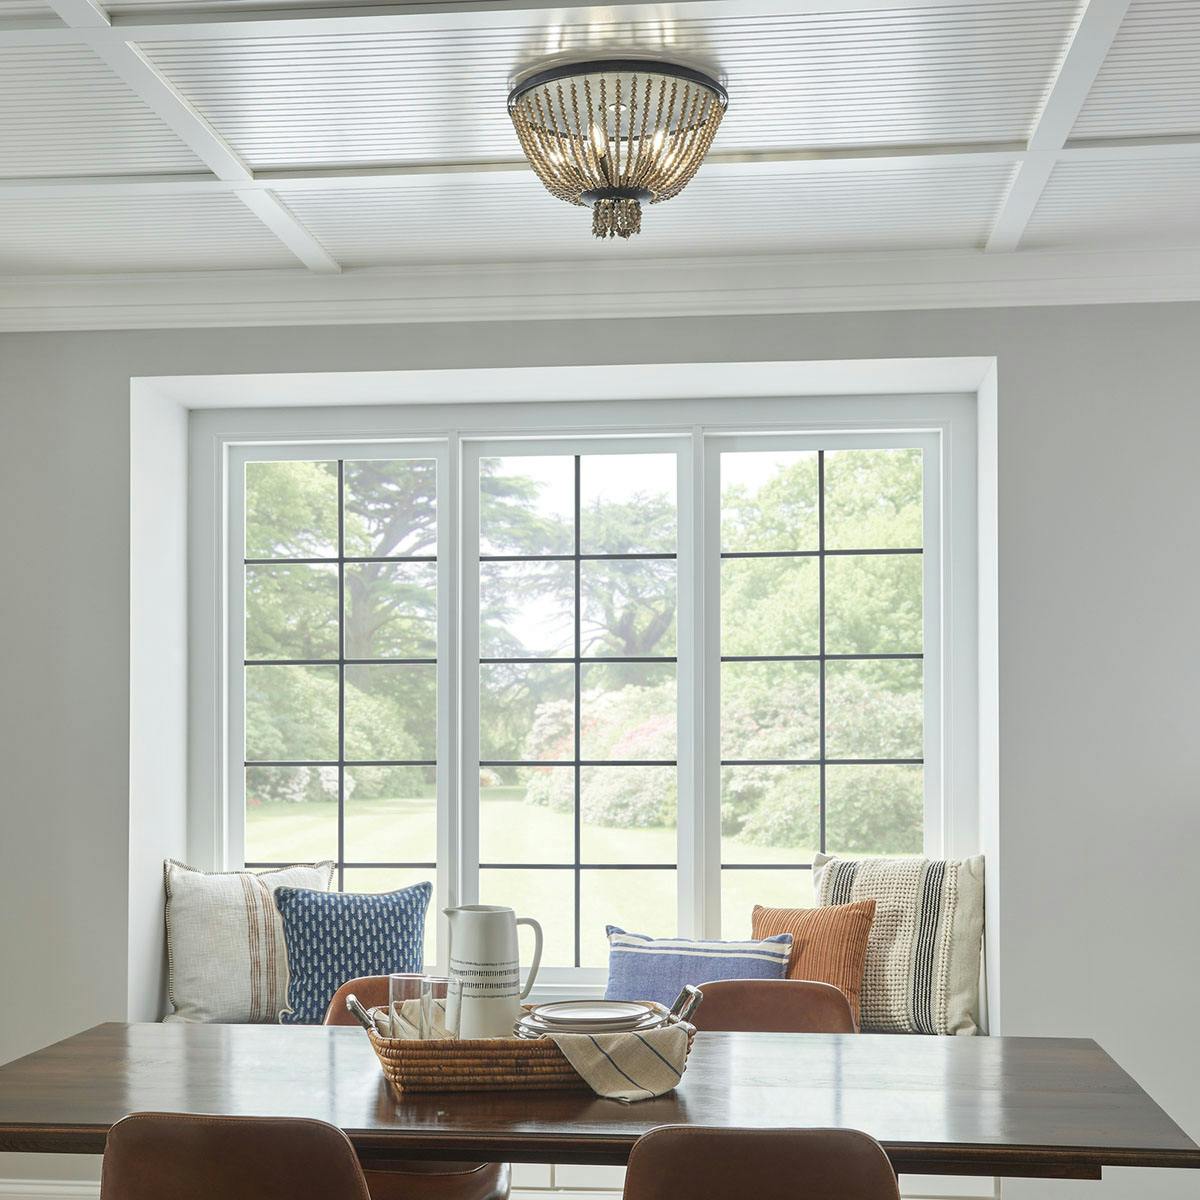 Day time dining room image featuring Brisbane flush mount light 43893DBK